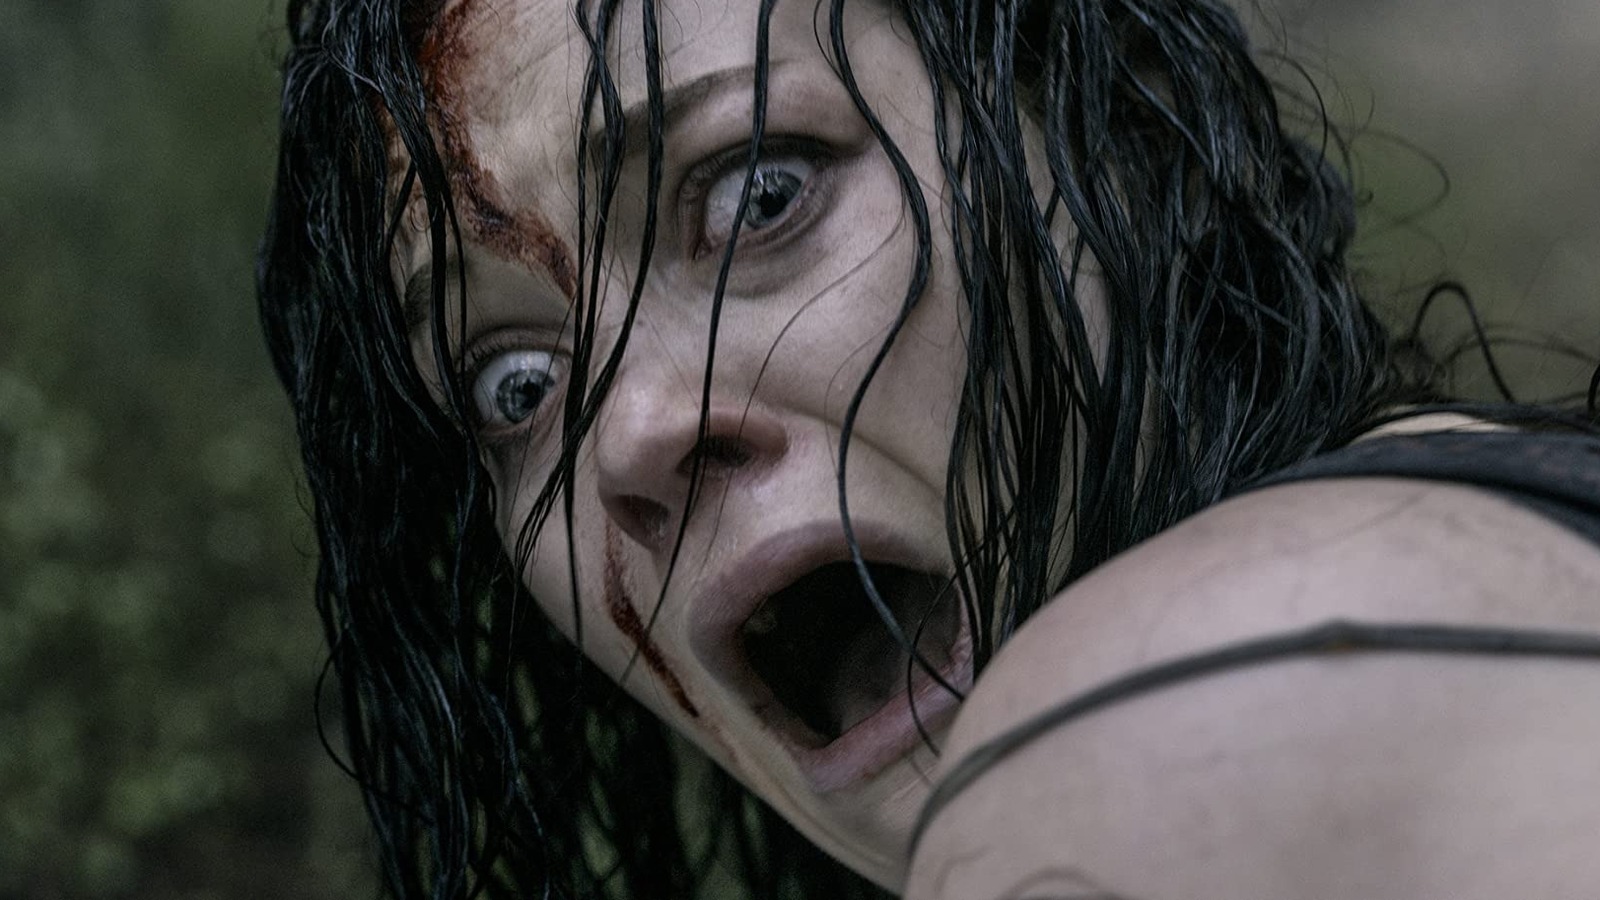 Evil Dead Rise' movie shakes up horror classic with new blood